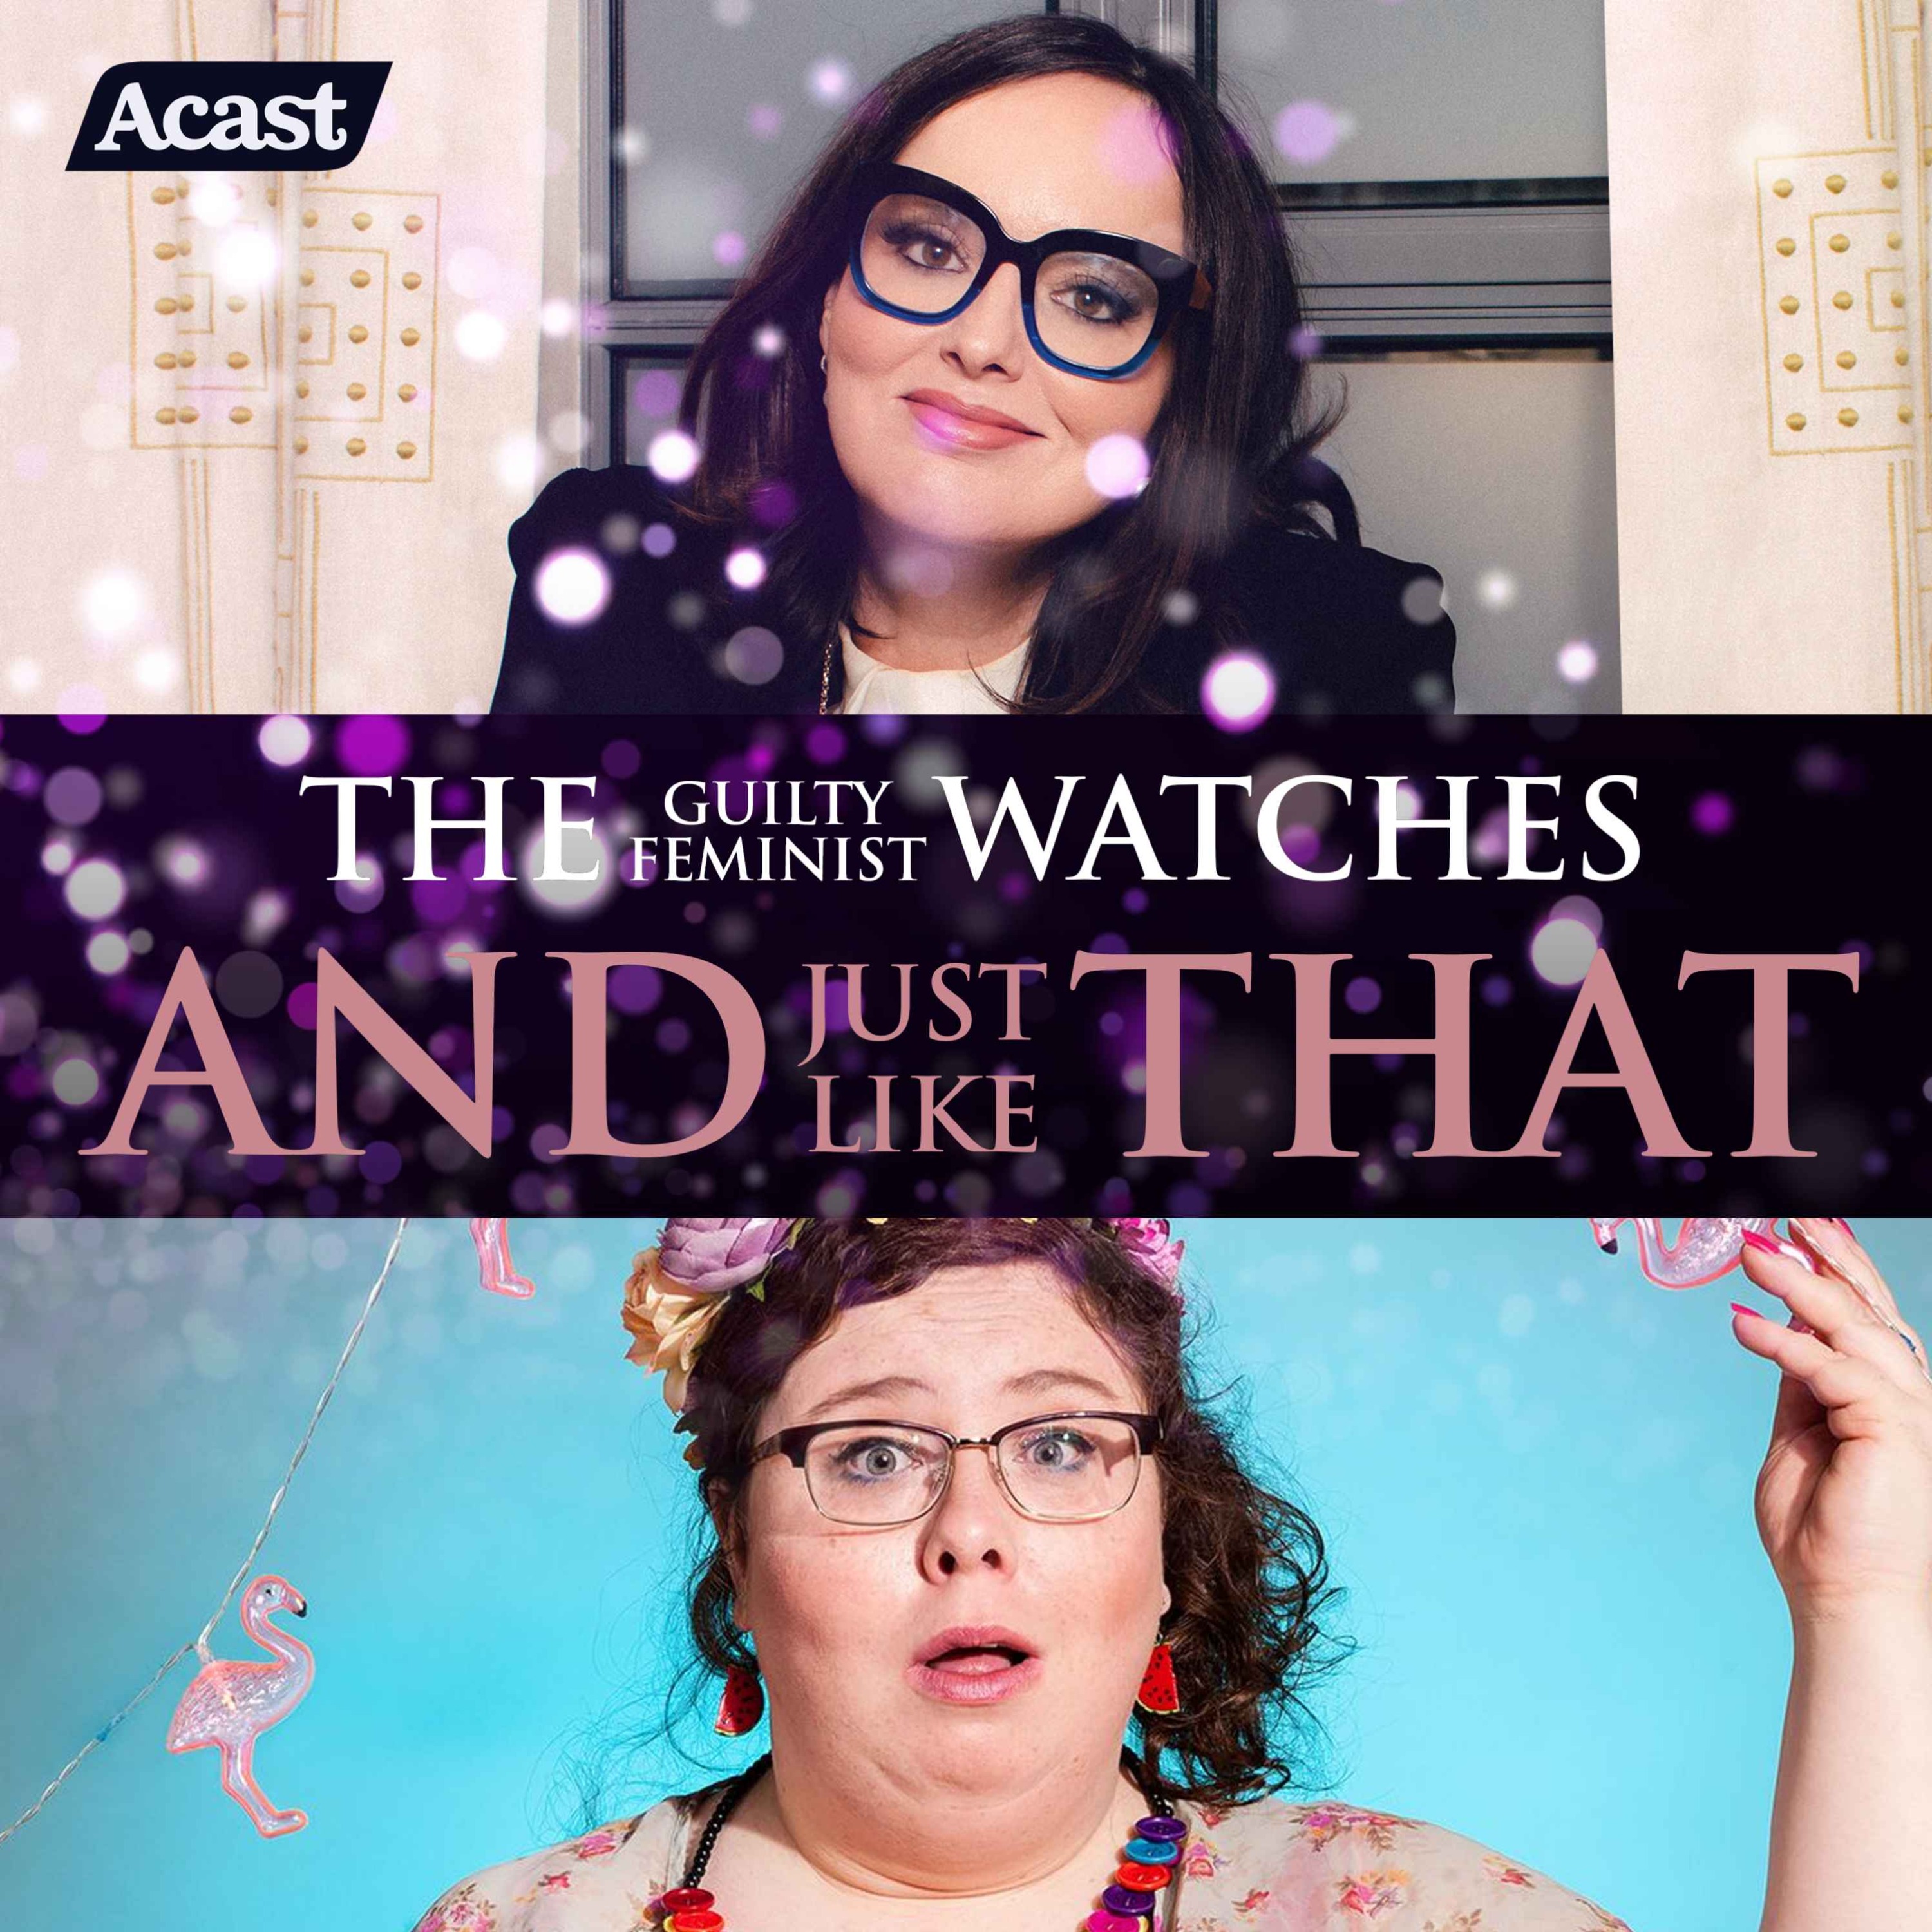 The Guilty Feminist watches And Just Like That - Episode 3 with Alison Spittle